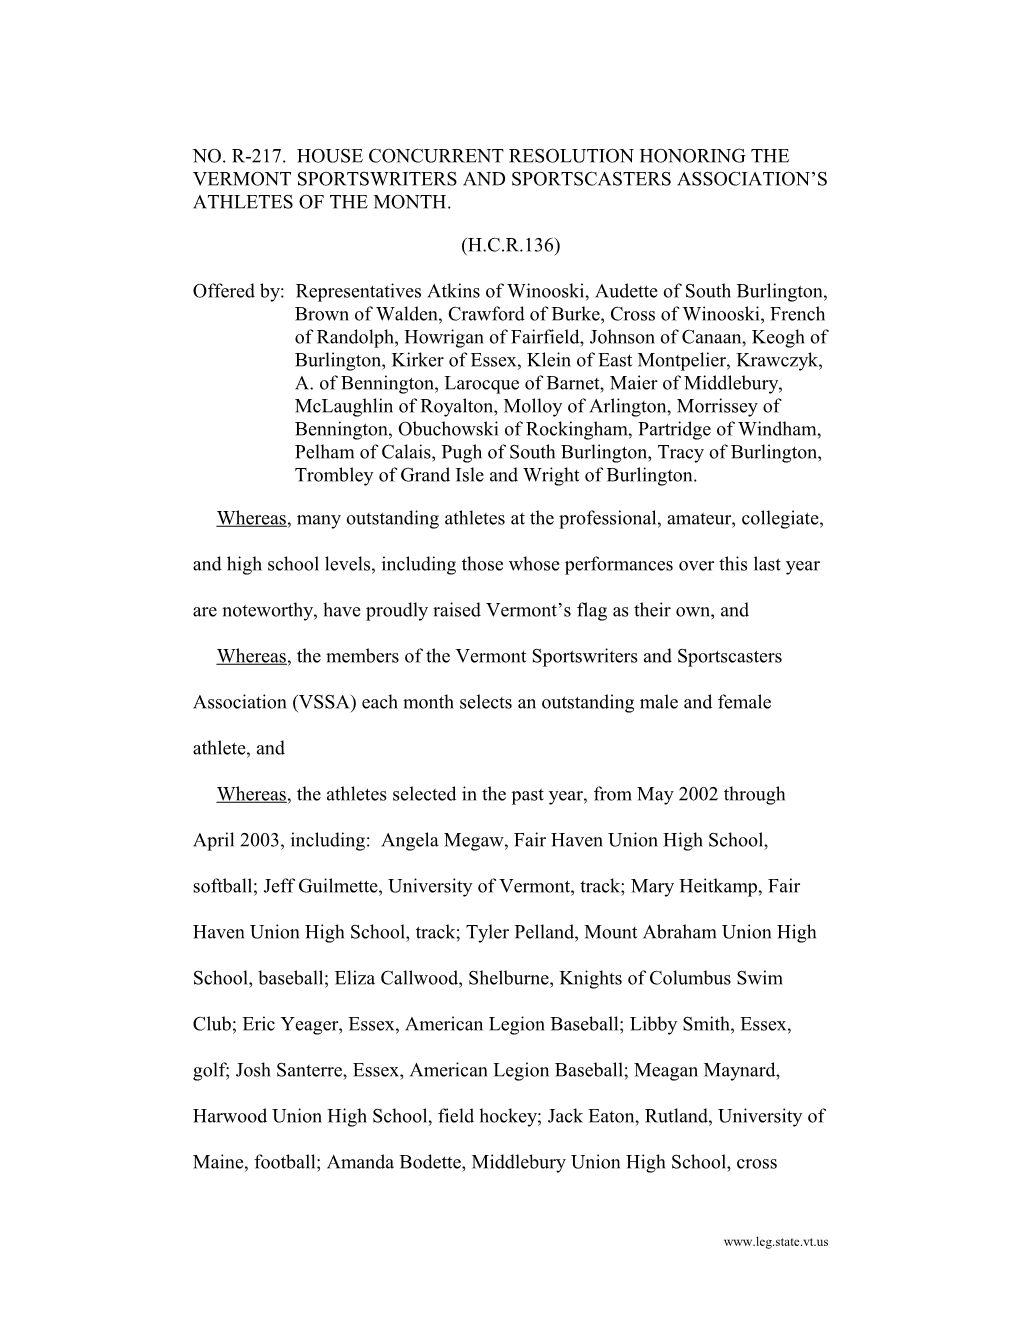 NO. R-217. House Concurrent Resolution Honoring the Vermont Sportswriters and Sportscasters